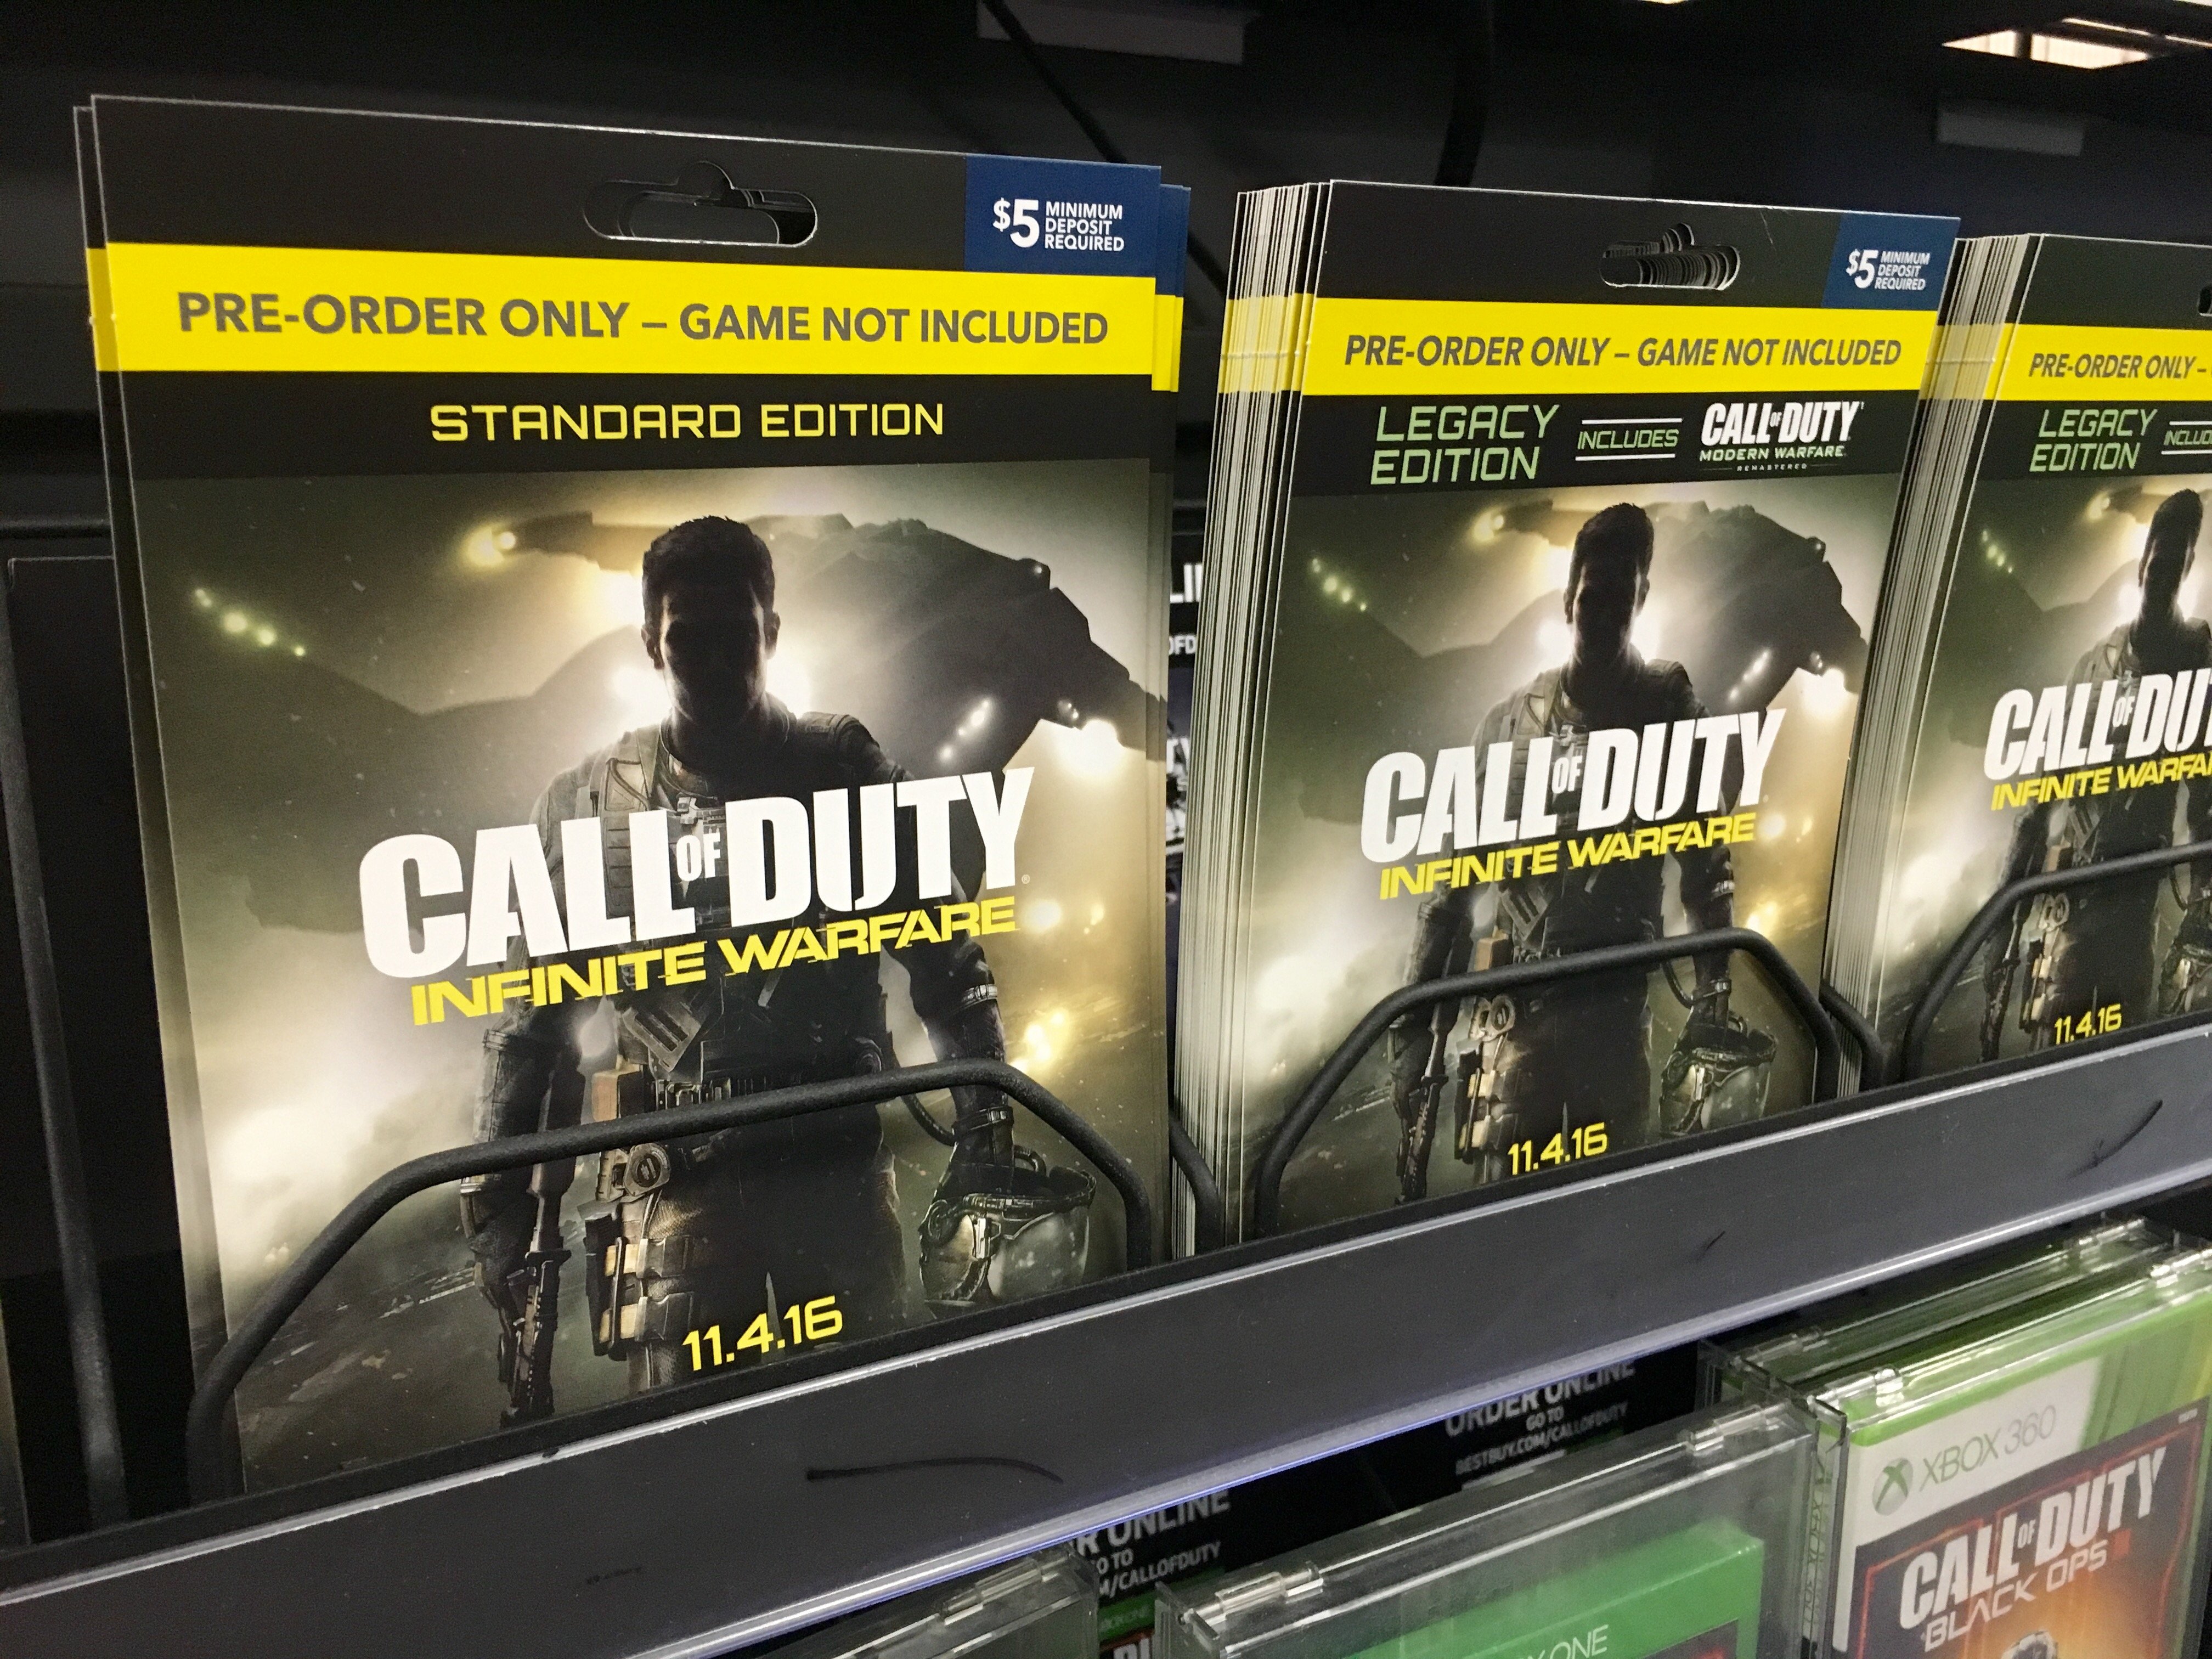 What you need to know about the Call of Duty: Infinite Warfare release.